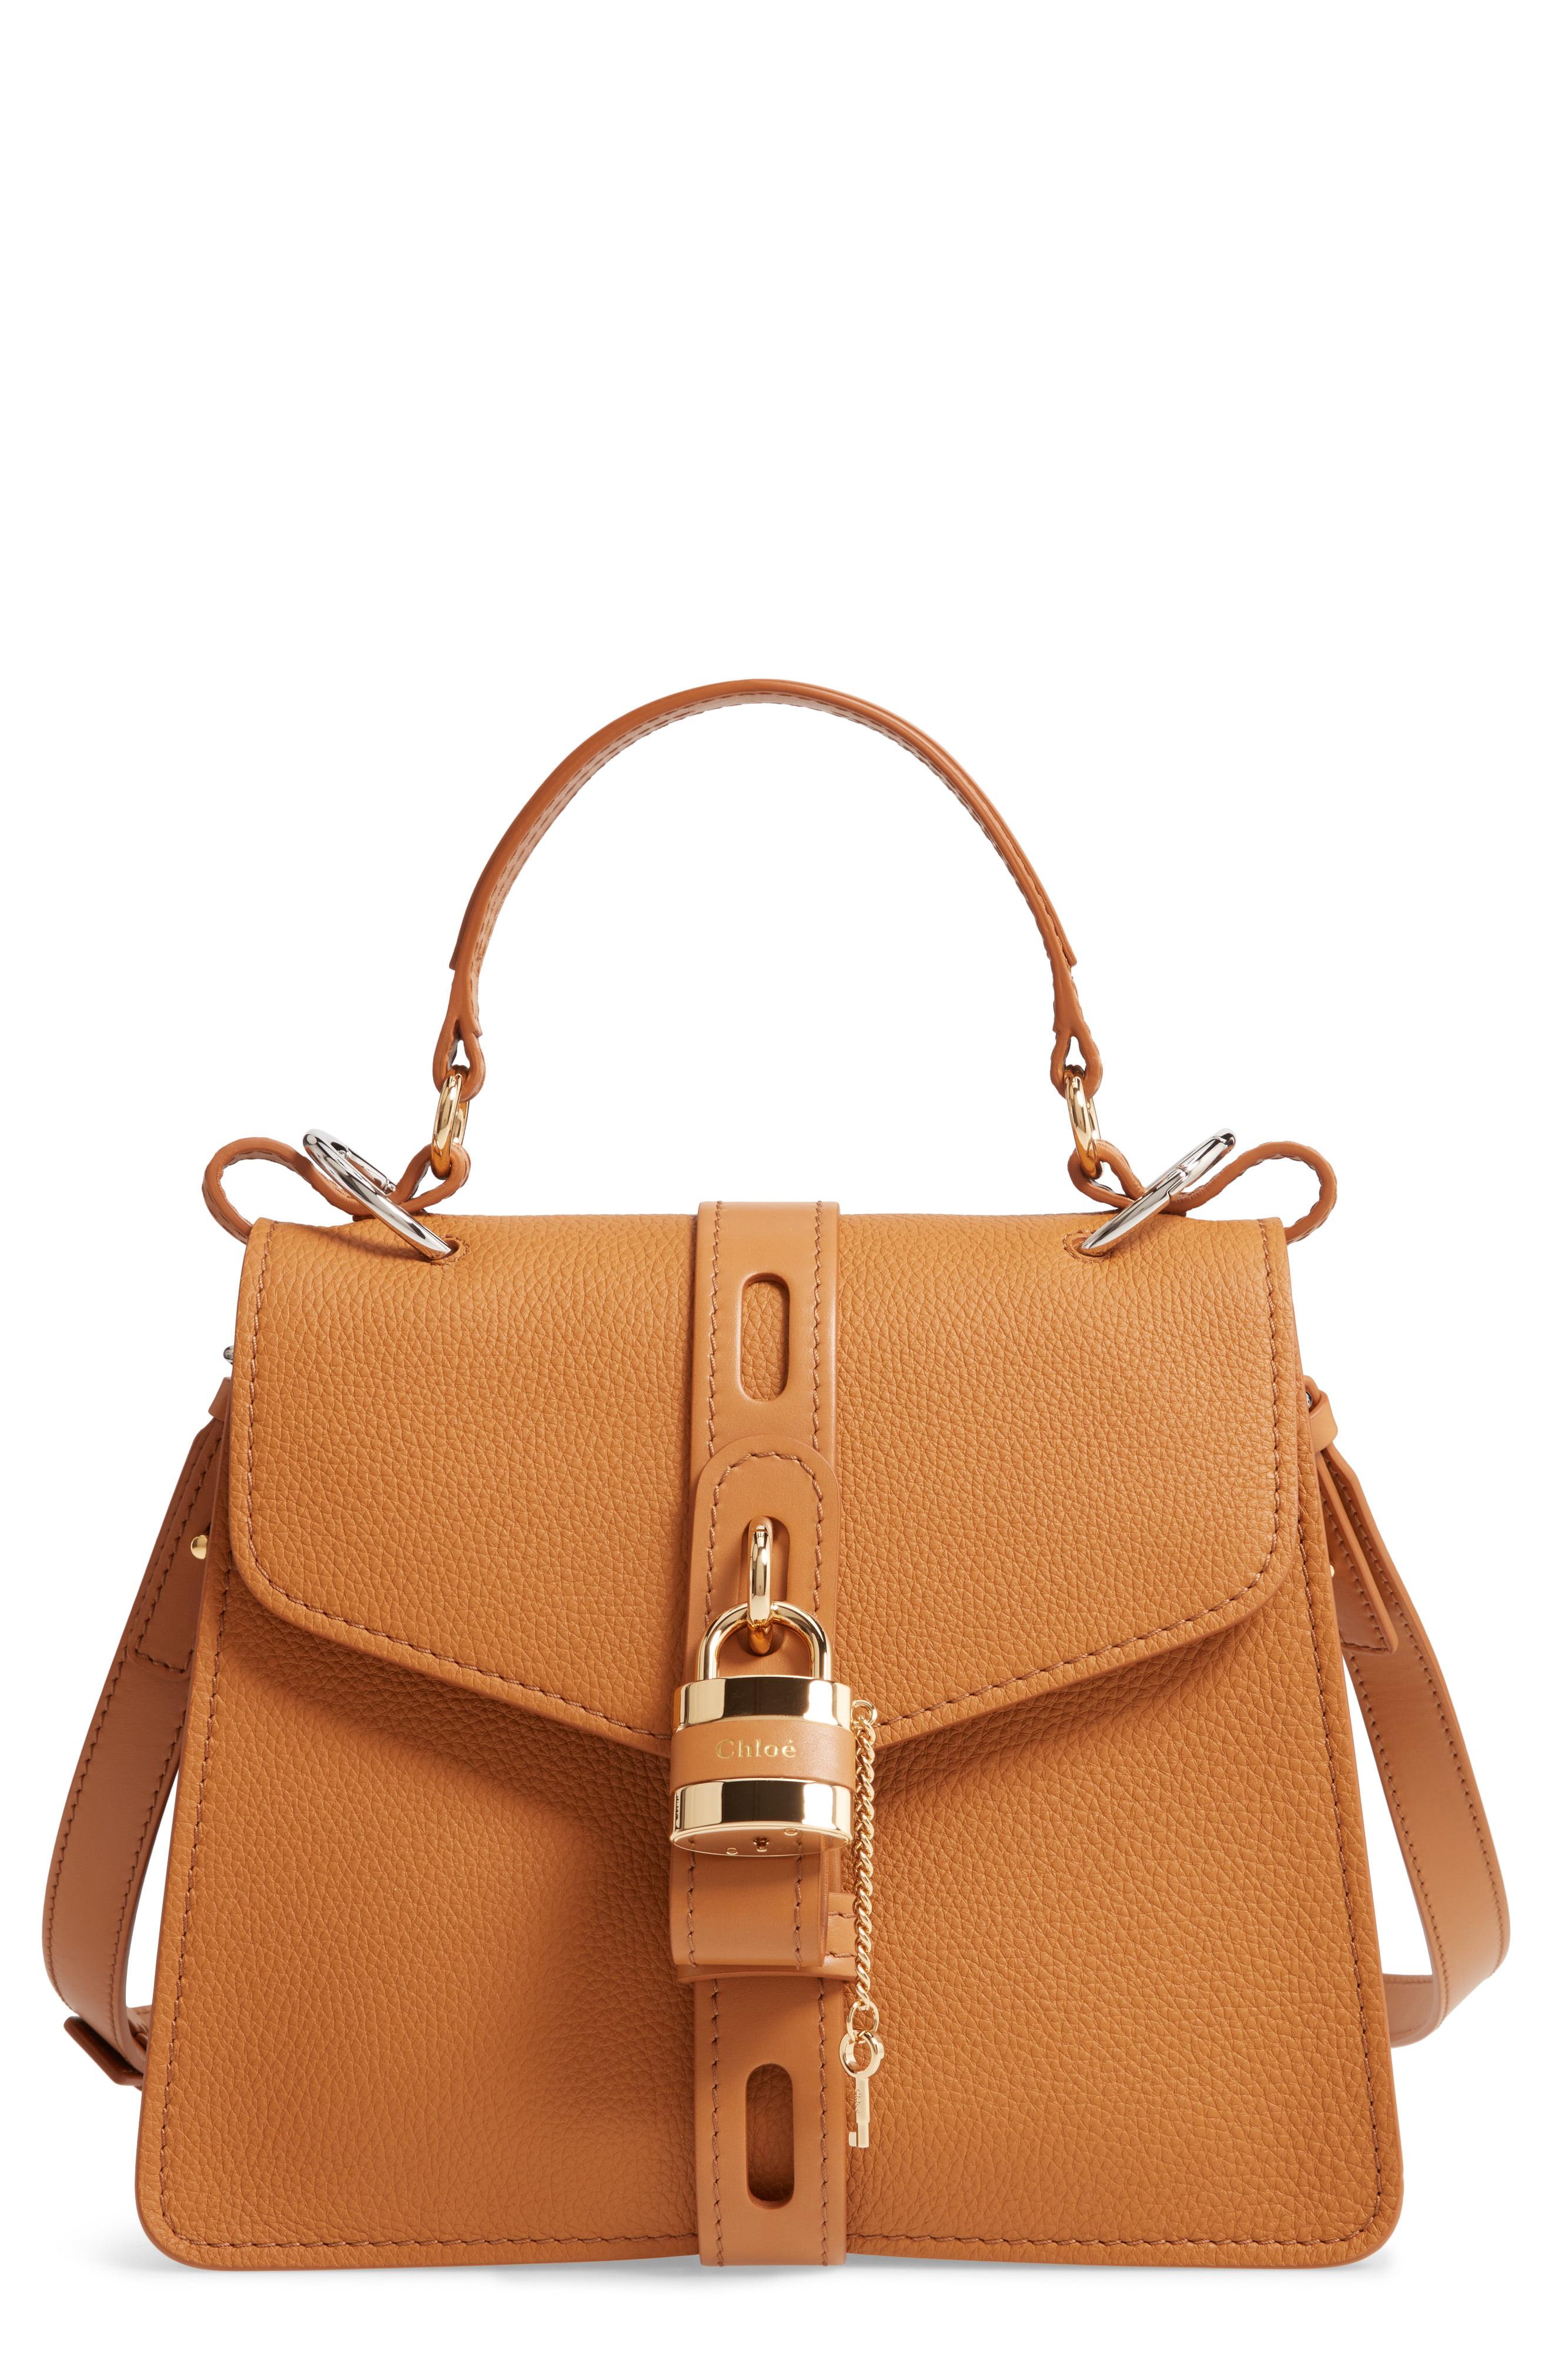 Chloé Leather Small Aby Day Tote Bag in Brown - Save 23% - Lyst